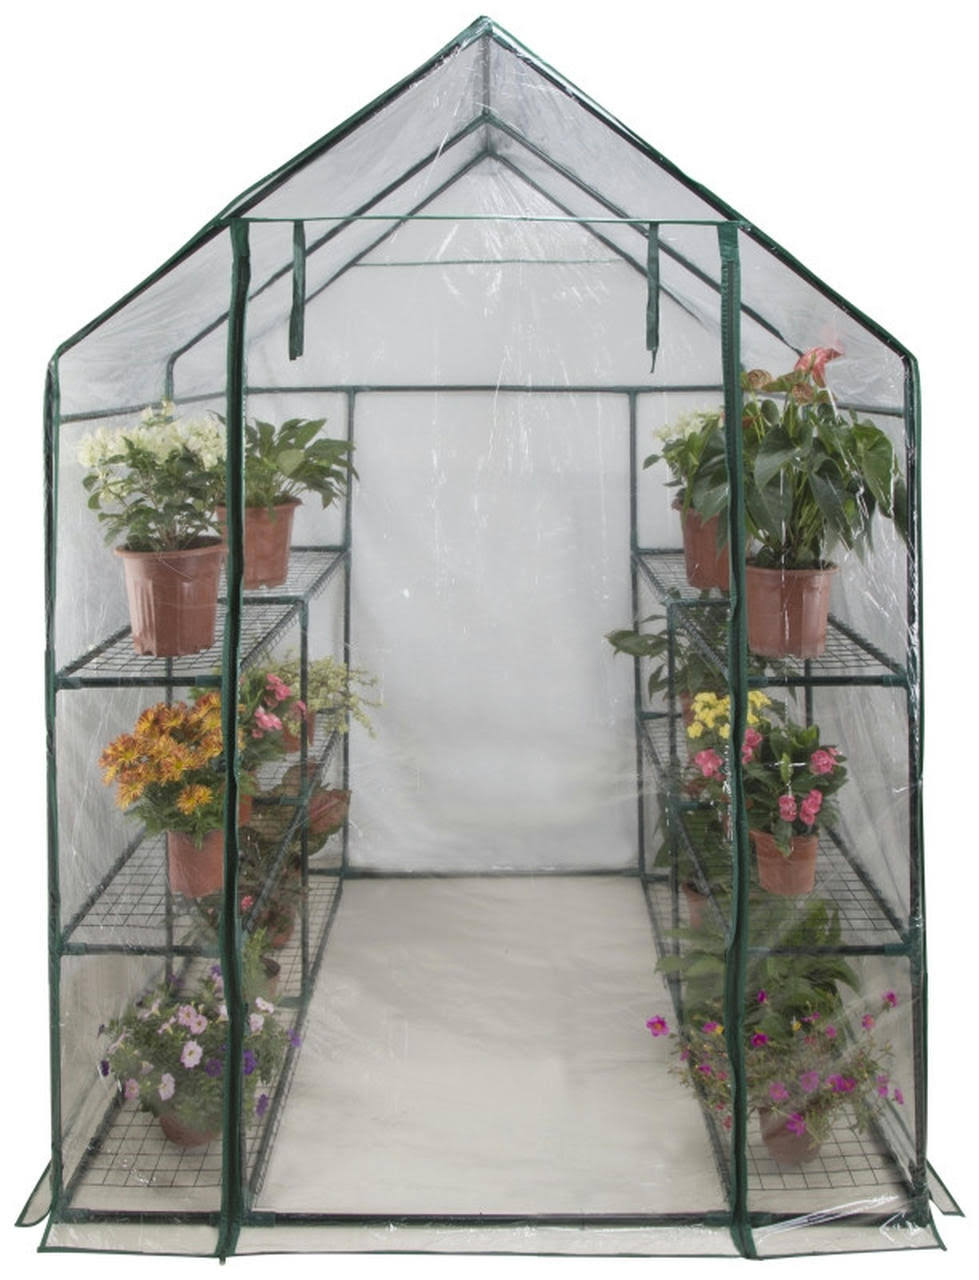 Landscapers Select Greenhouse - Large, 56" x 56" x 77"